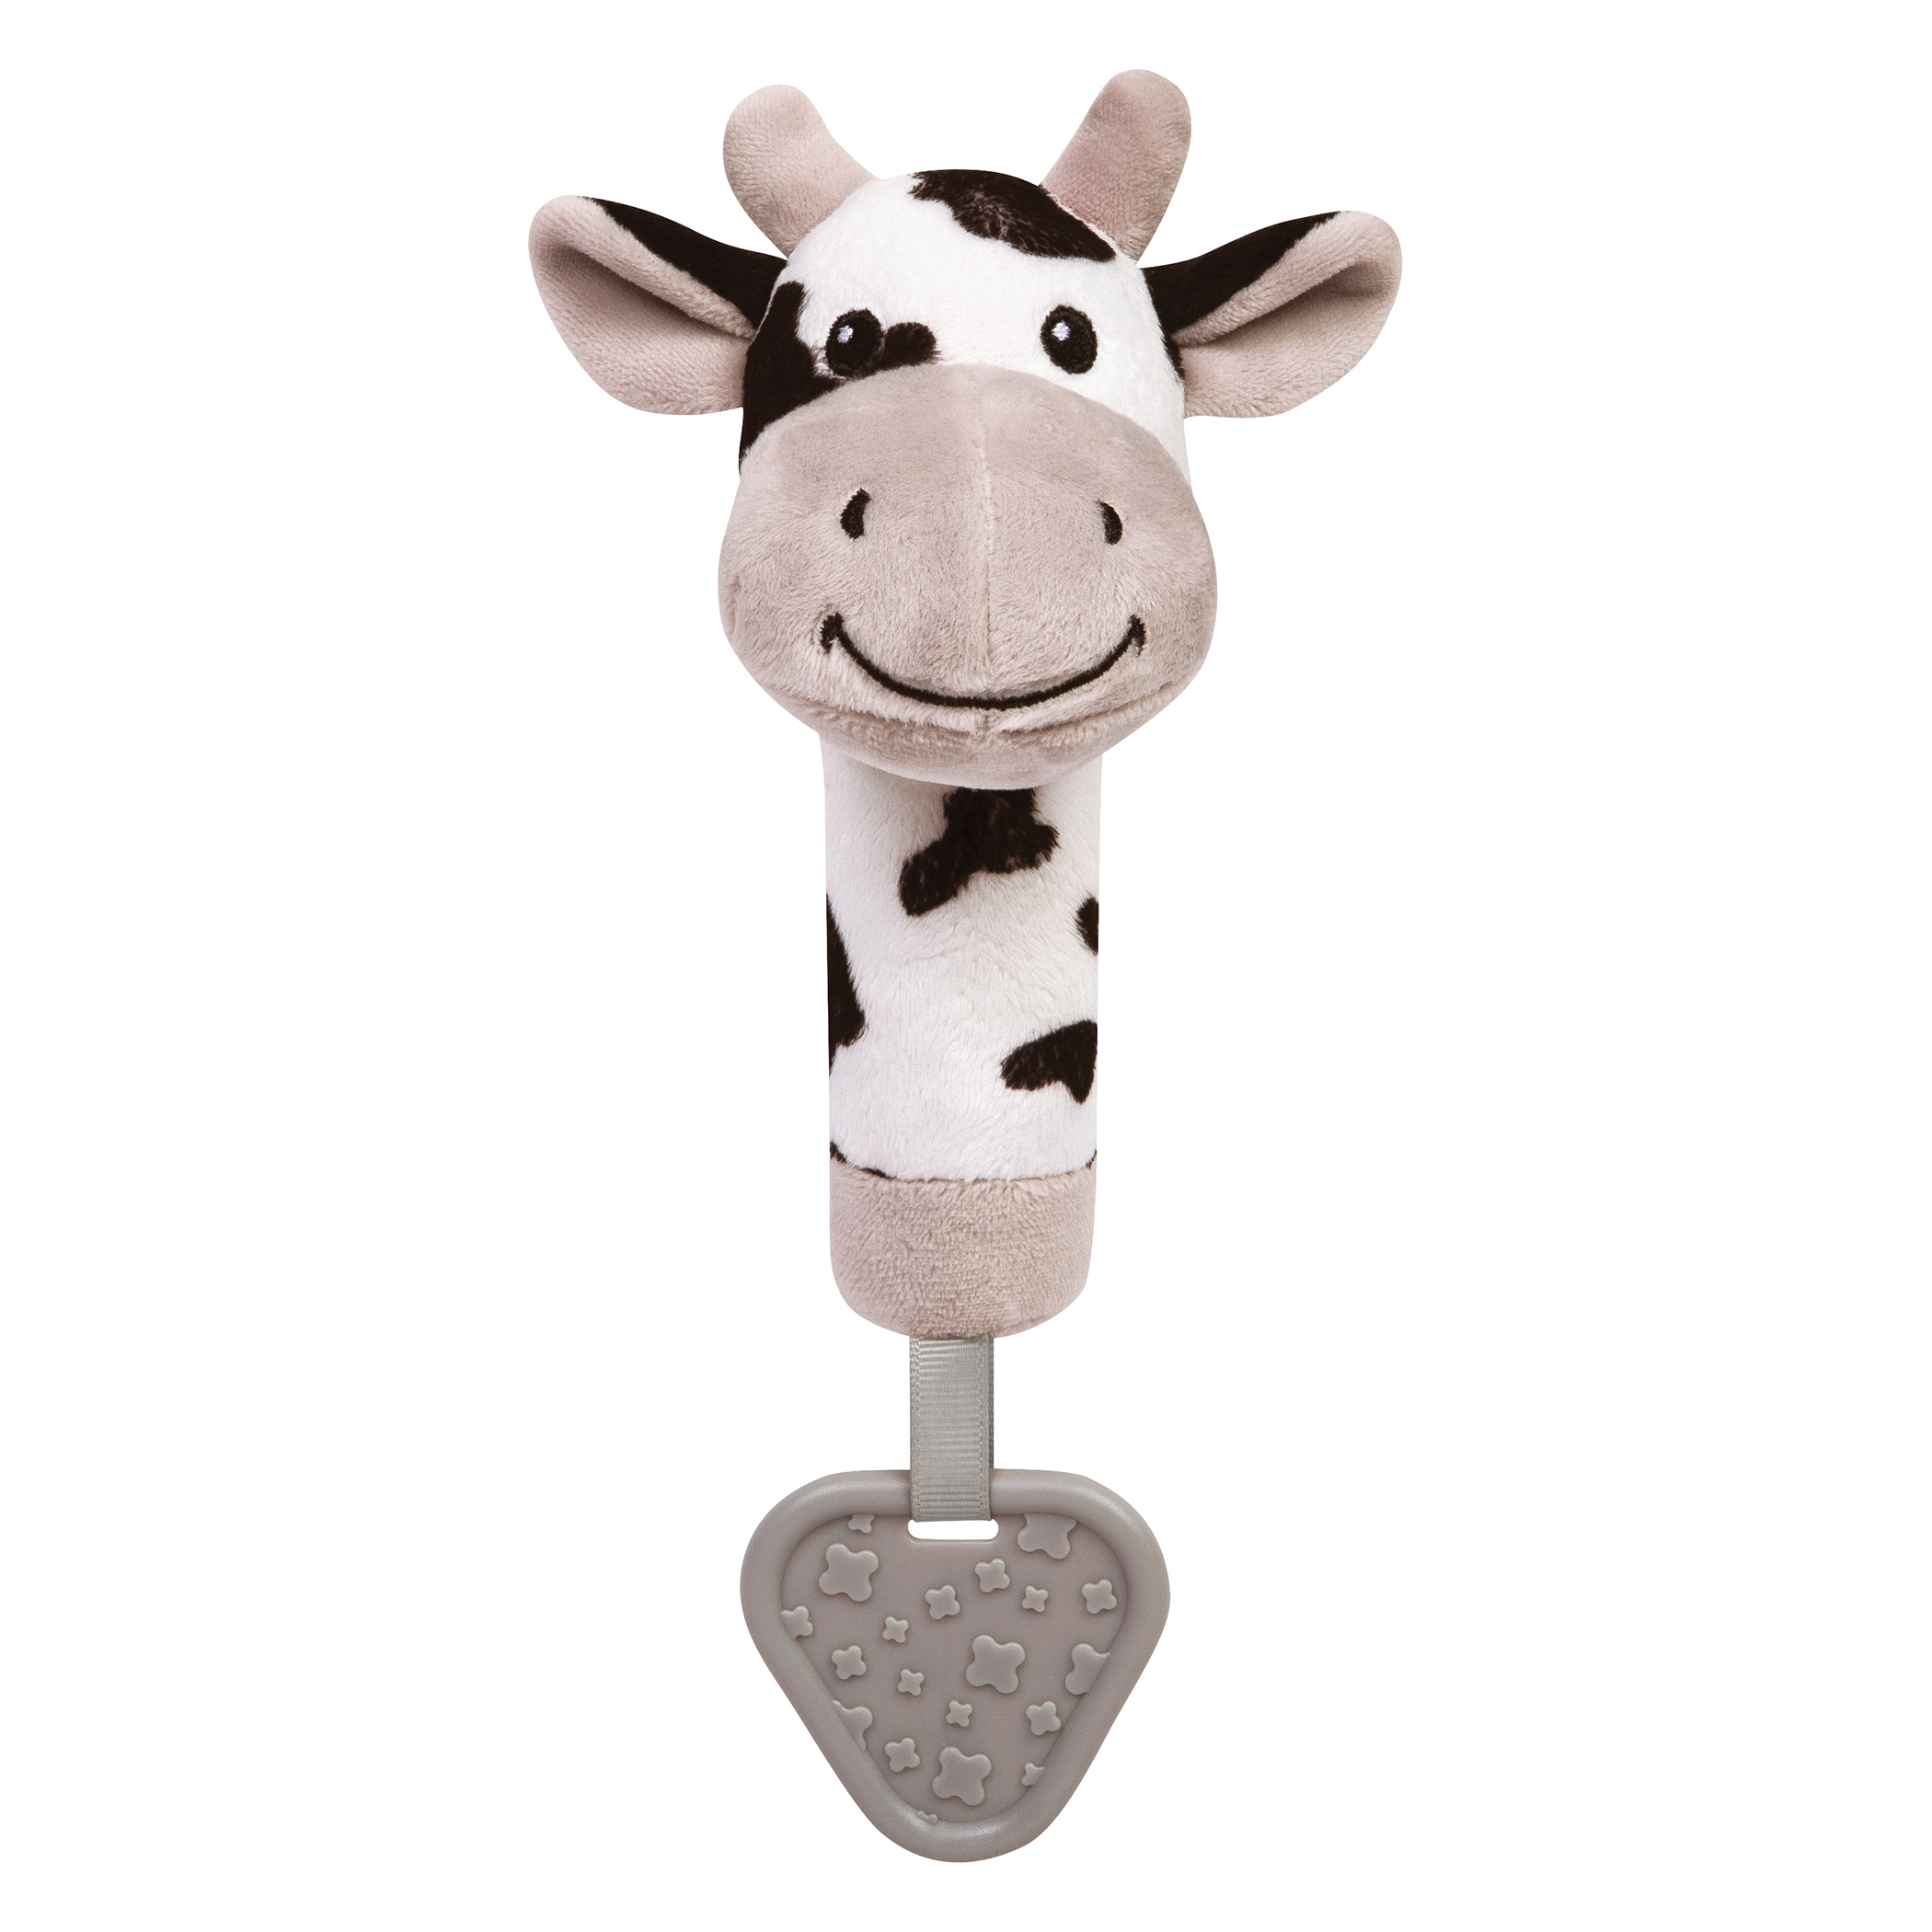 Trend Lab 9" Cow Bucket Plush Toys (4 Pieces) - image 4 of 4